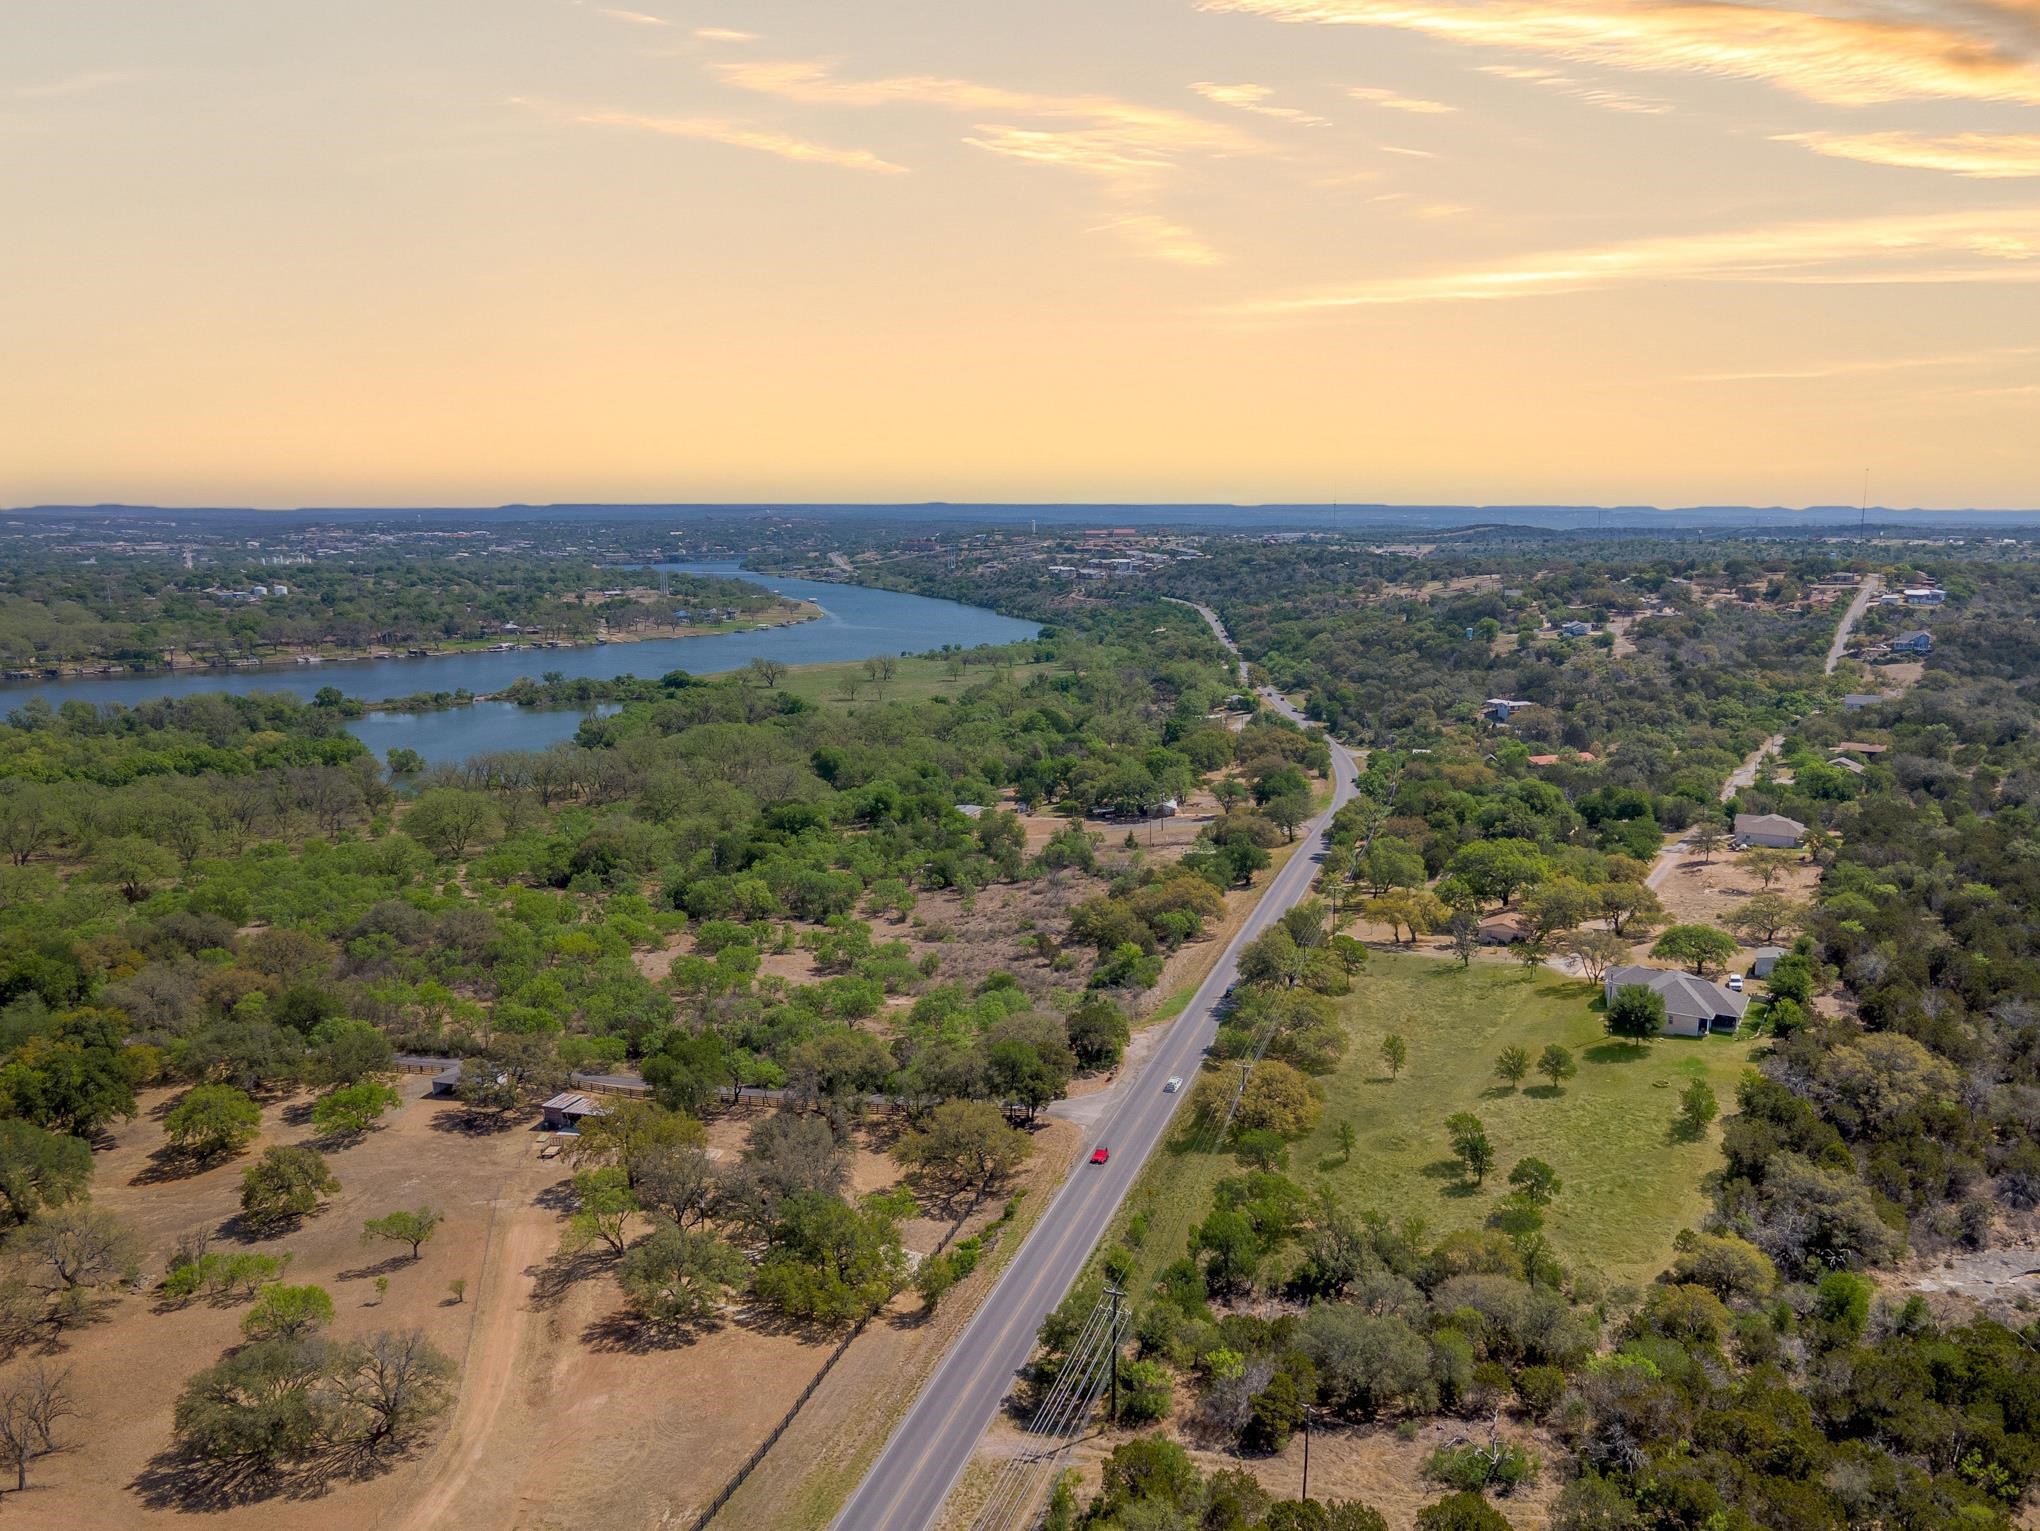 Build your dream home or investment property in Channel Oaks - located on the outskirts of Marble Falls, Cottonwood Shores, and Horseshoe Bay. Marble Falls ISD. The subdivision has exclusive private access to Lake Marble Falls as well as a 25 acres homeowner park. Inquire about five surrounding lots also available for sale. Link to Channel Oaks POA: https://www.co2poa.org/